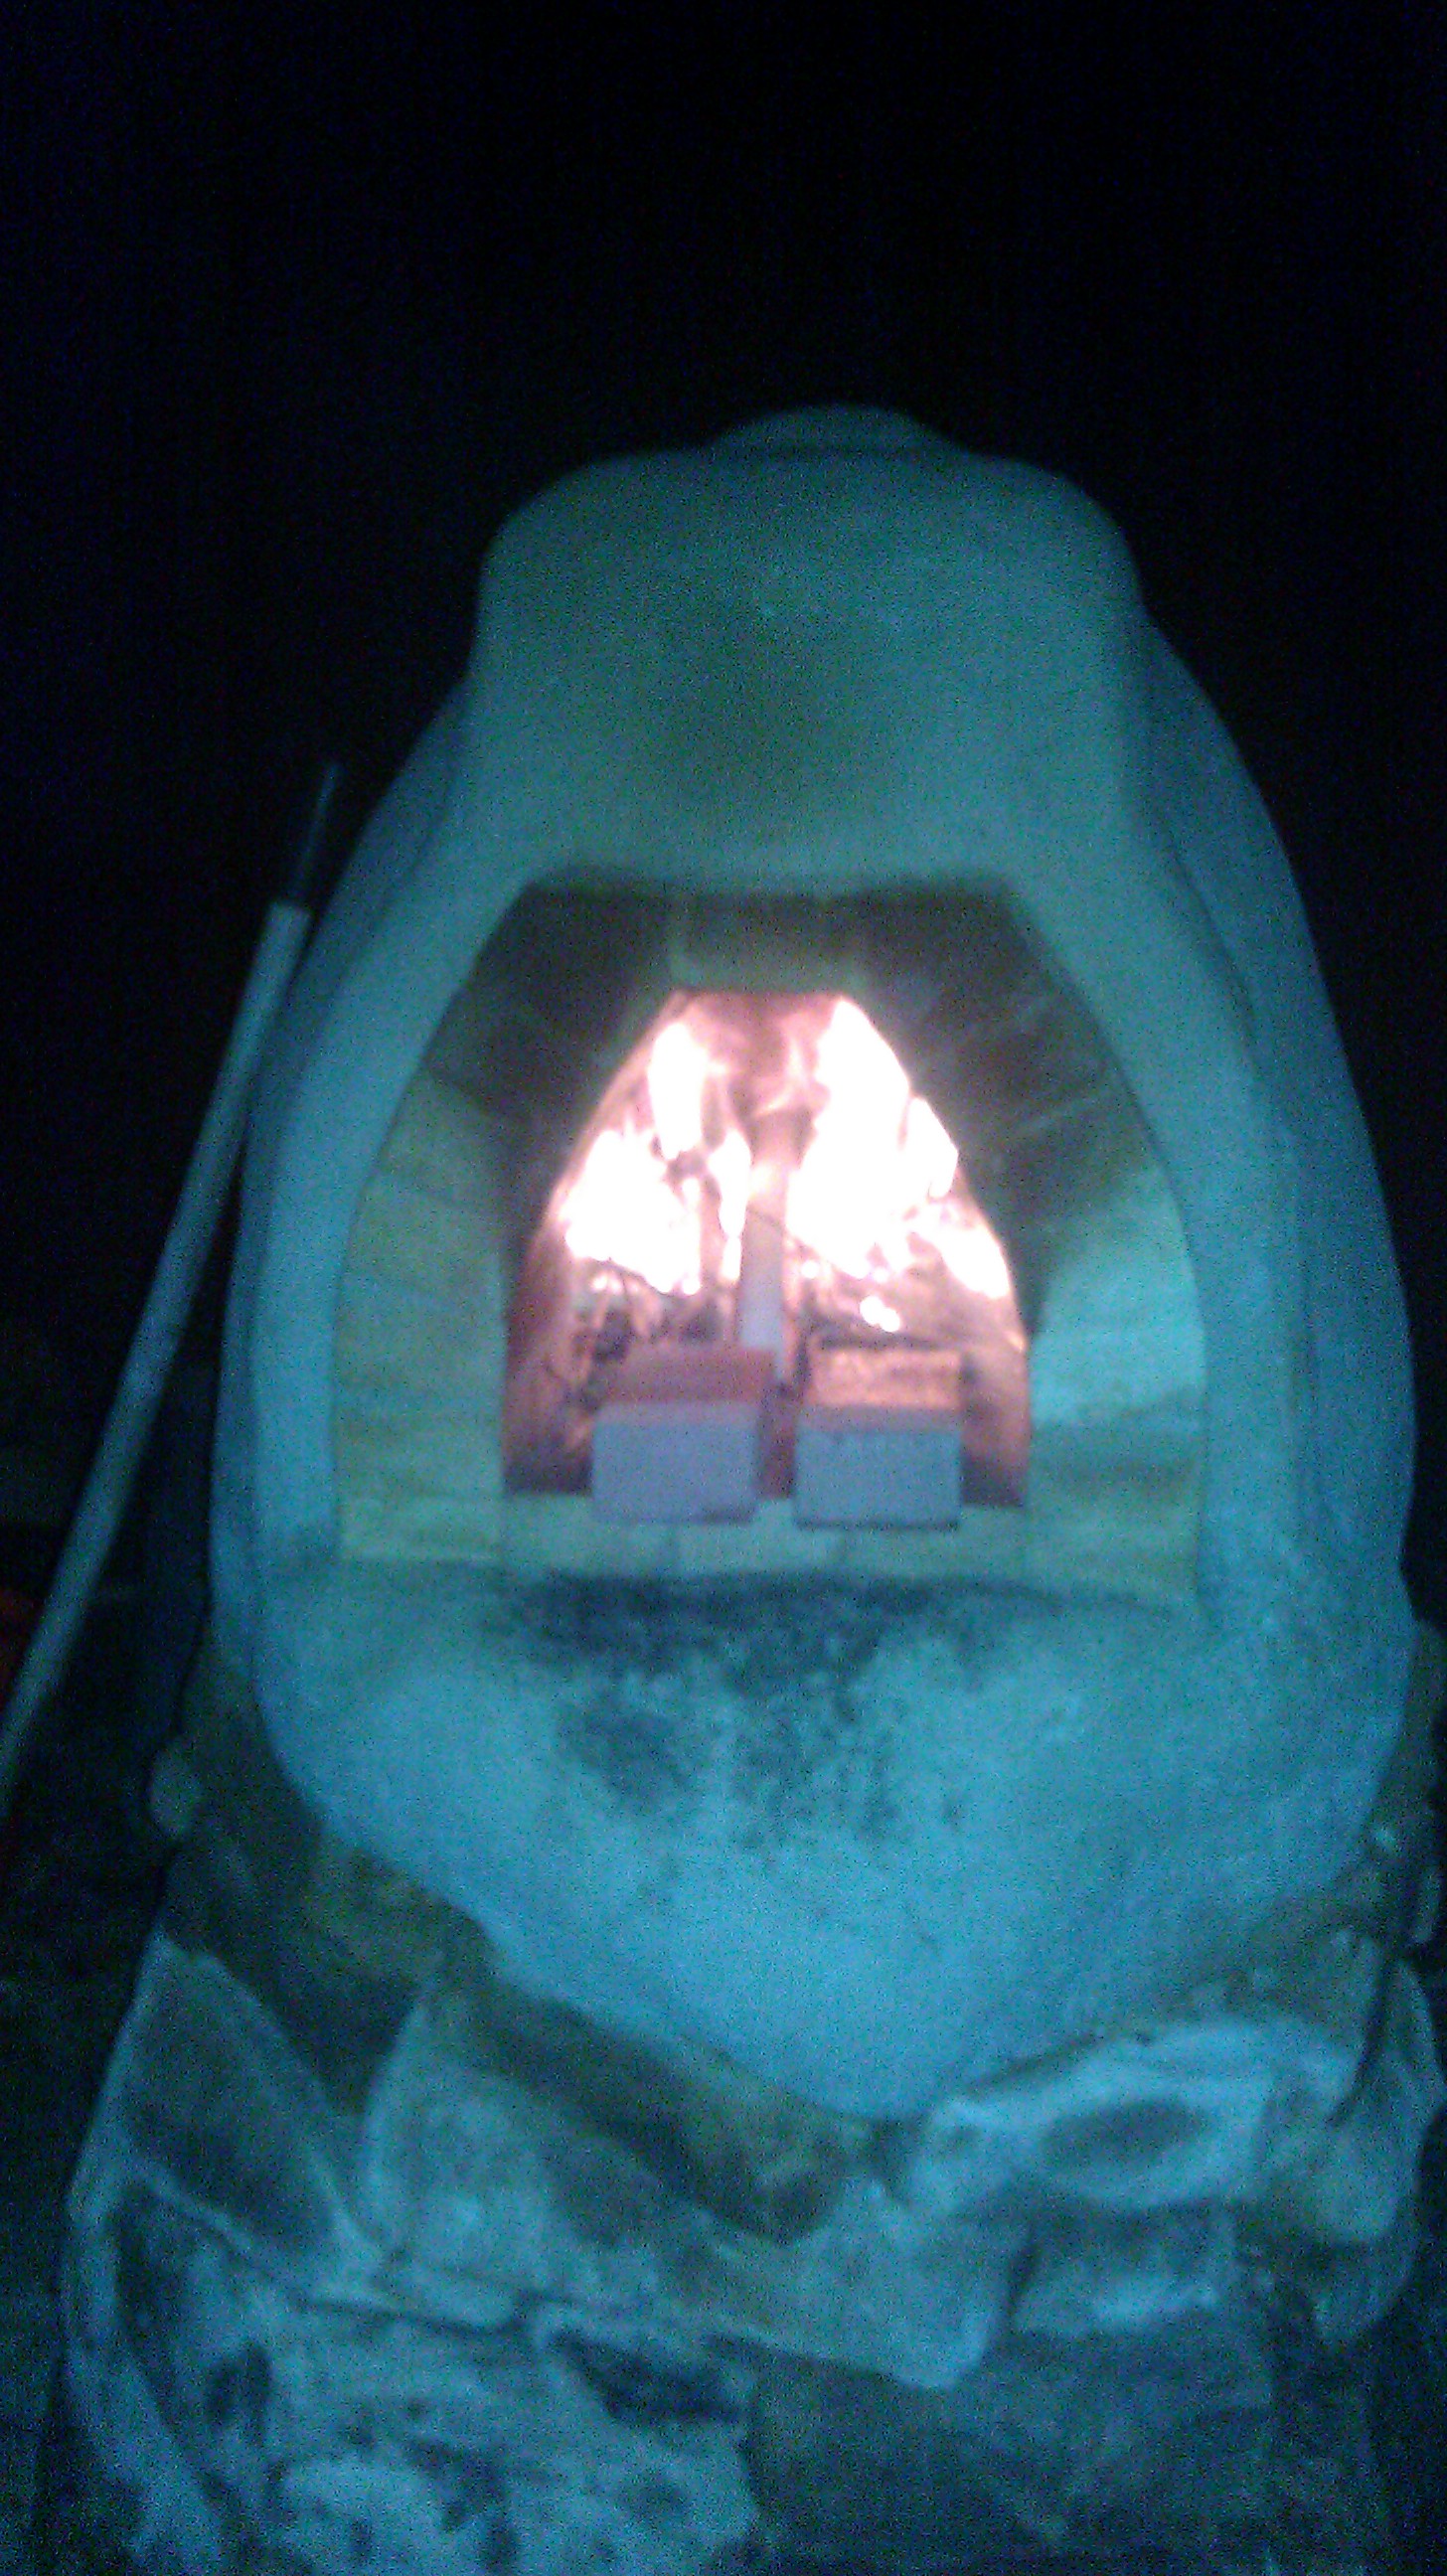 The Cob Oven is Finally Completed!